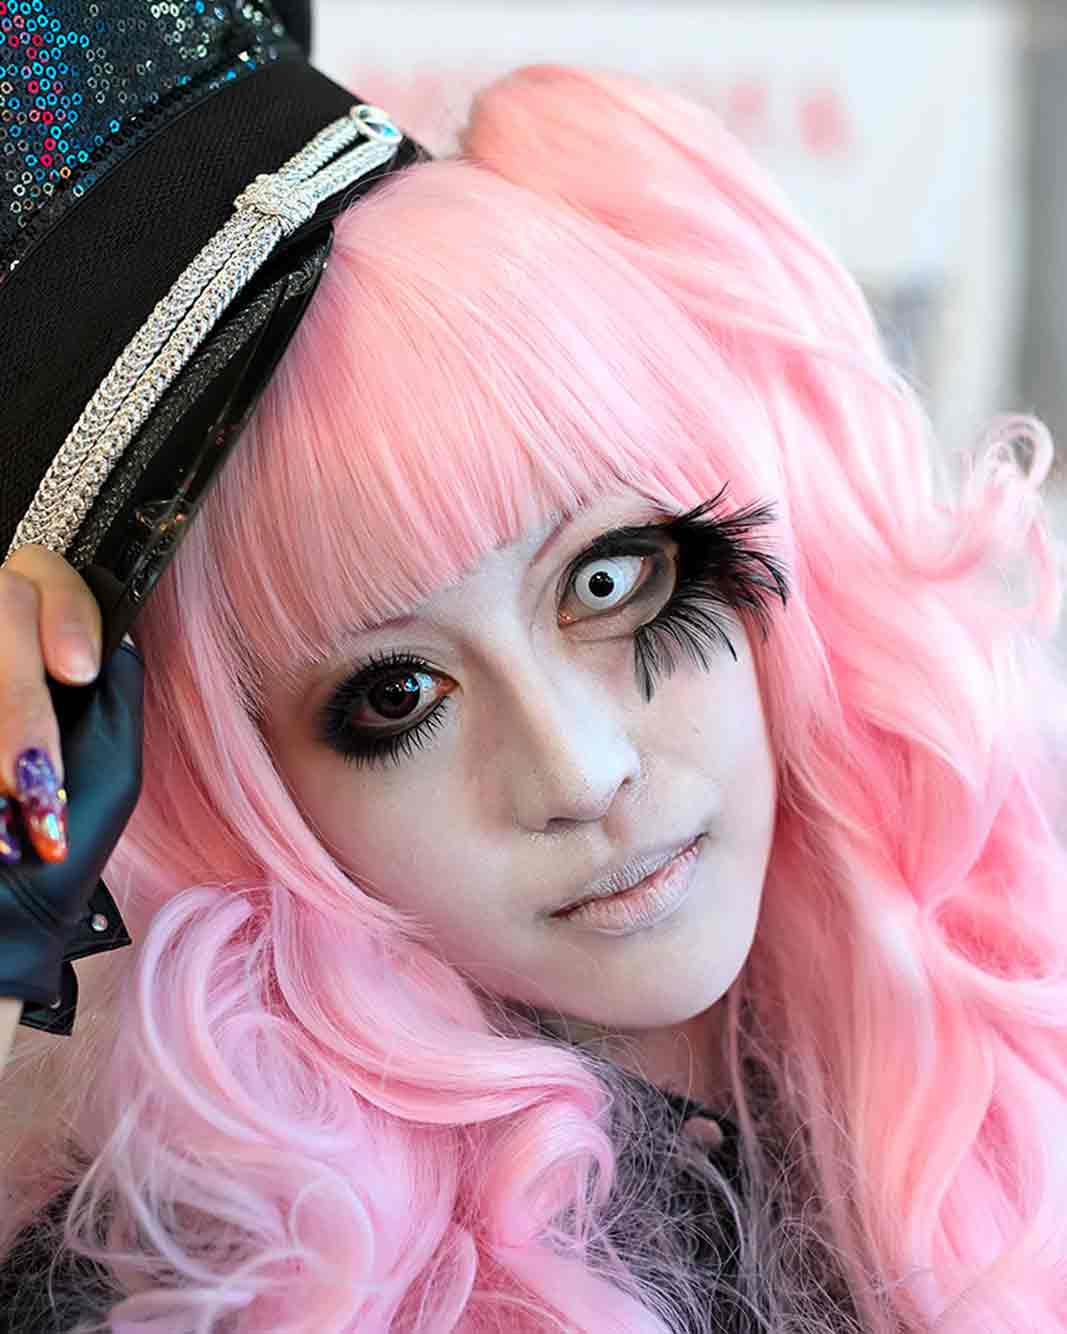 Japanese woman with gothic Halloween makeup